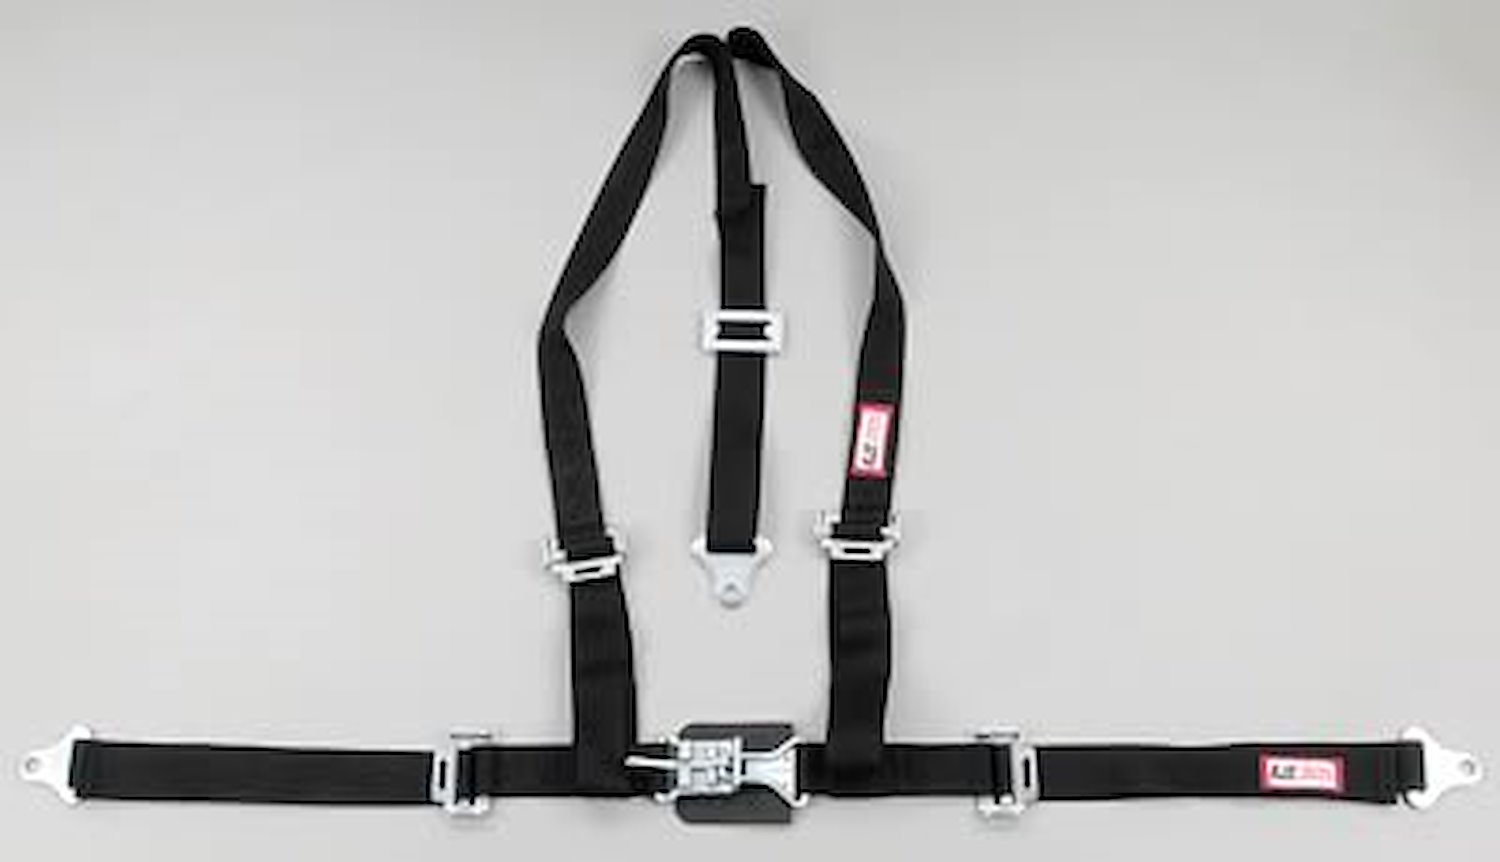 NON-SFI L&L HARNESS 2 PULL DOWN Lap Belt w/Adjuster 2 S.H. Individual FLOOR Mount ALL WRAP ENDS PURPLE